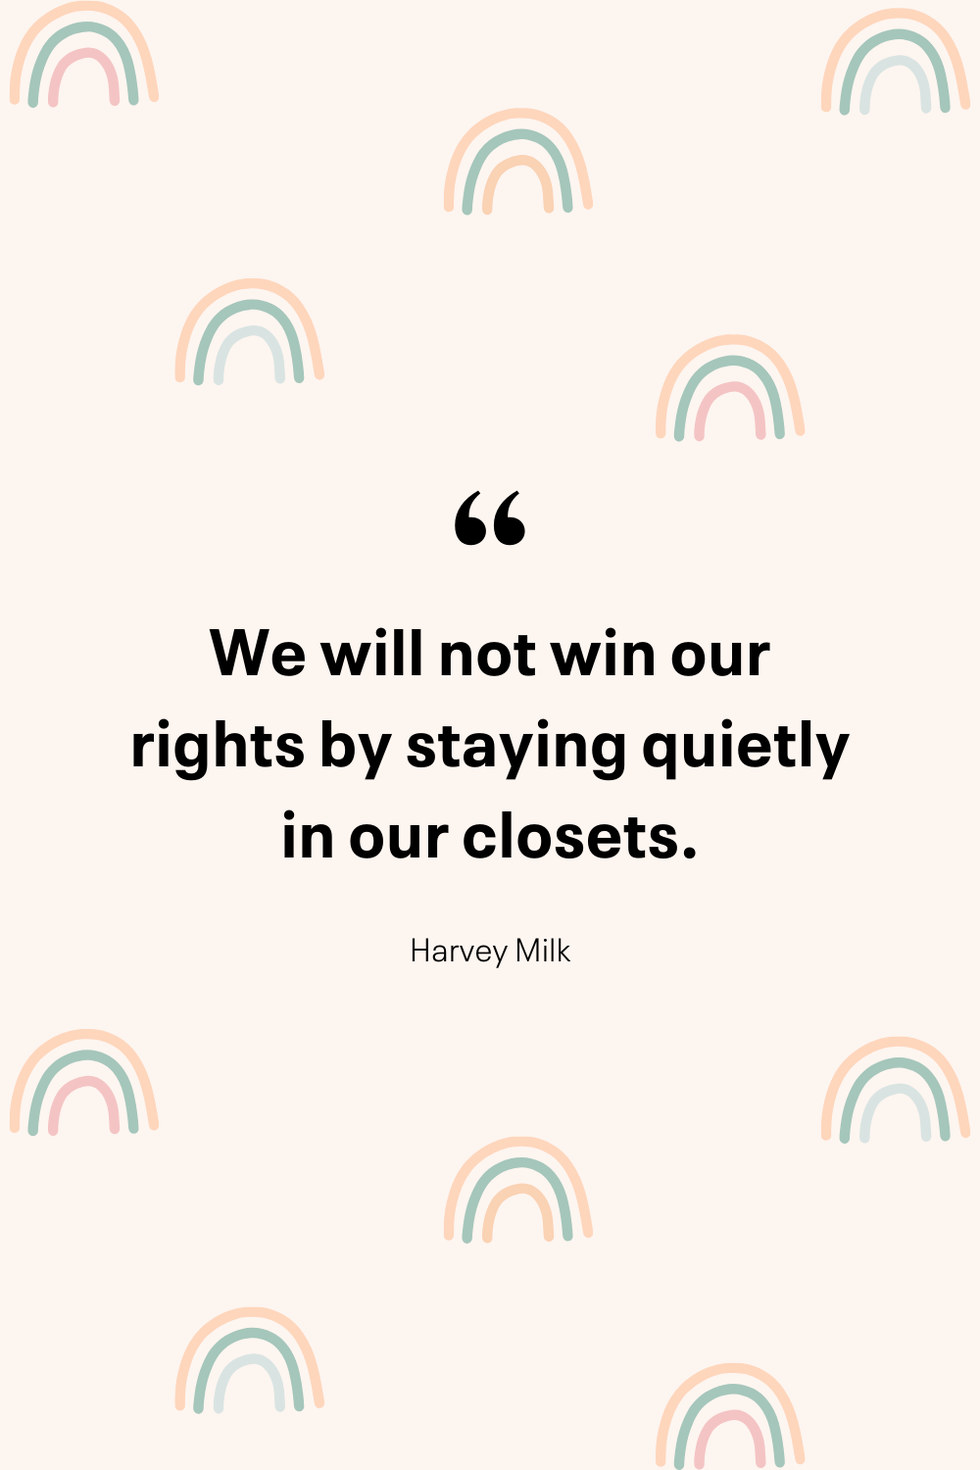 pride month quote on light pink background with rainbows